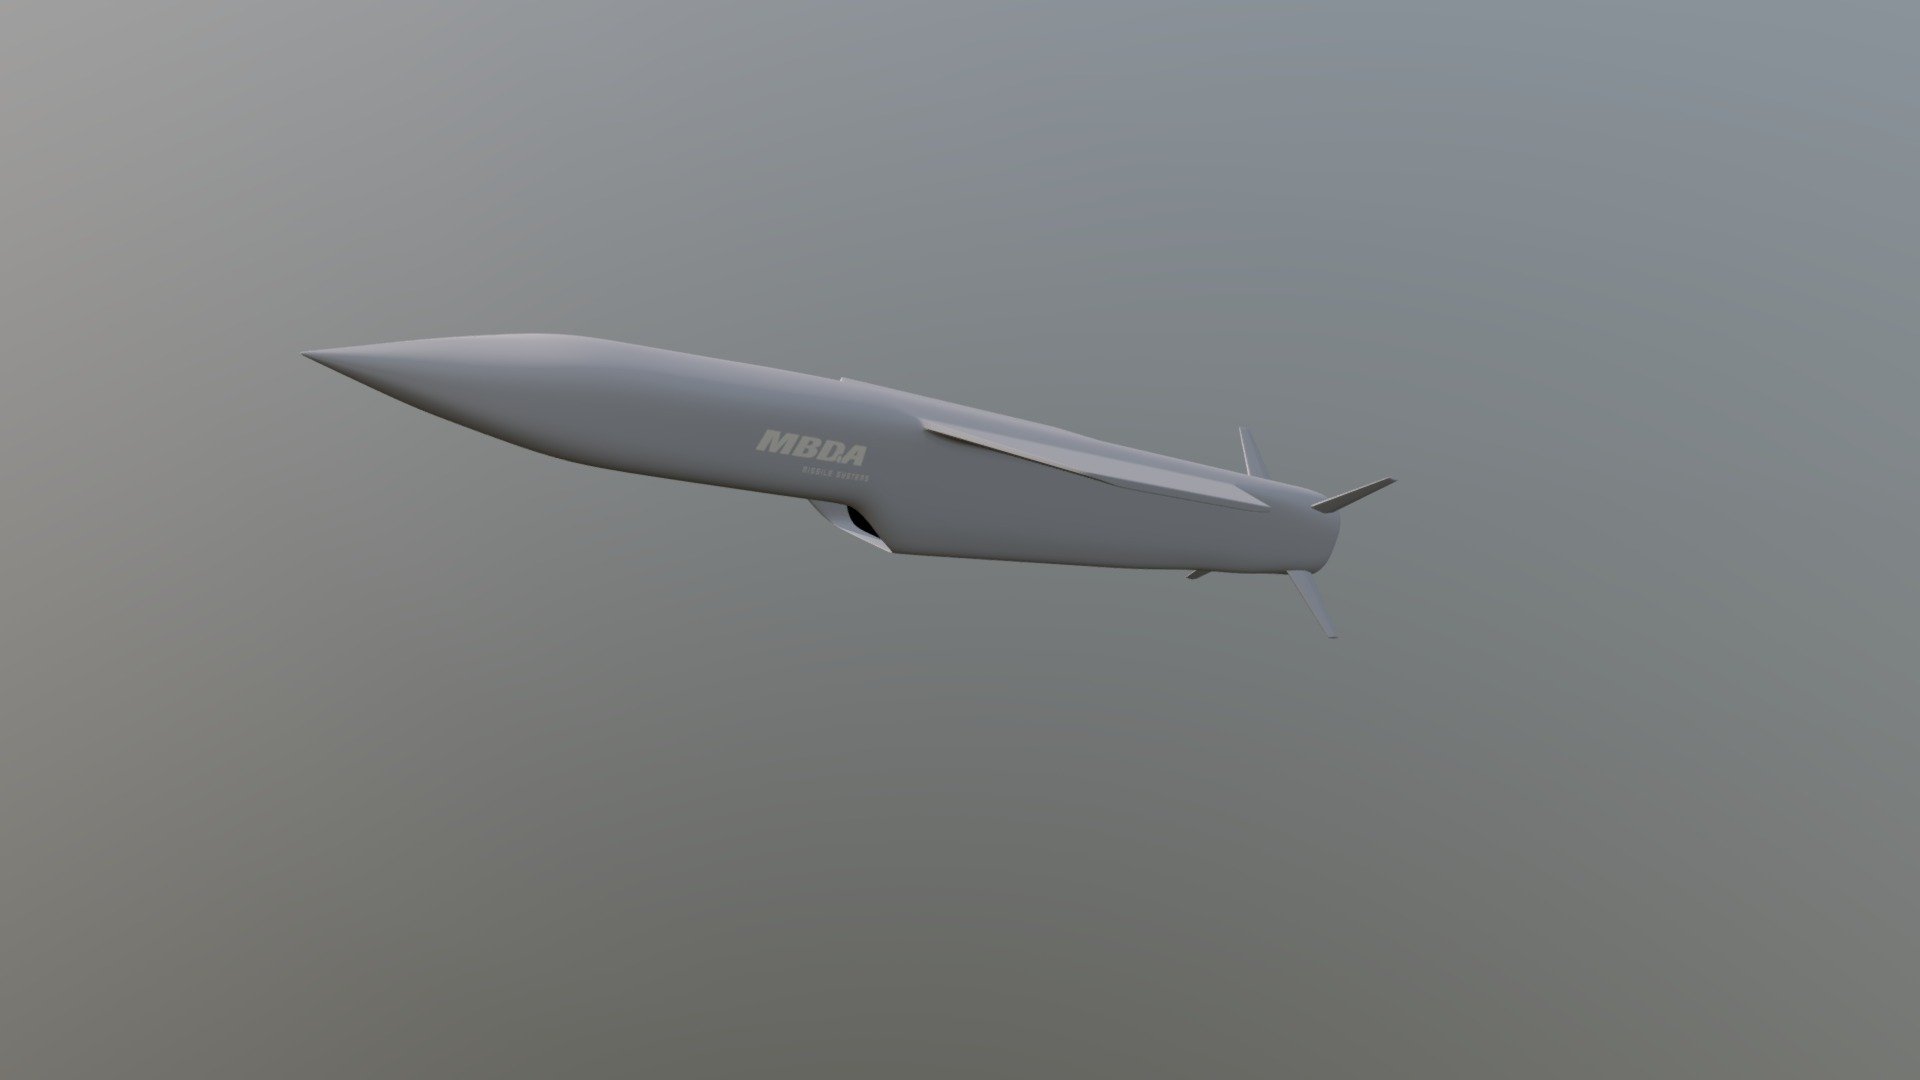 The deep-strike weapon concept is a high-supersonic long-range weapon that would typically weigh around 1000 kg. The primary mission would be anti-surface attack, but it could also be used for lethal defense suppression and as an air-to-air weapon against high-value assets such as airborne early warning platforms 3d model